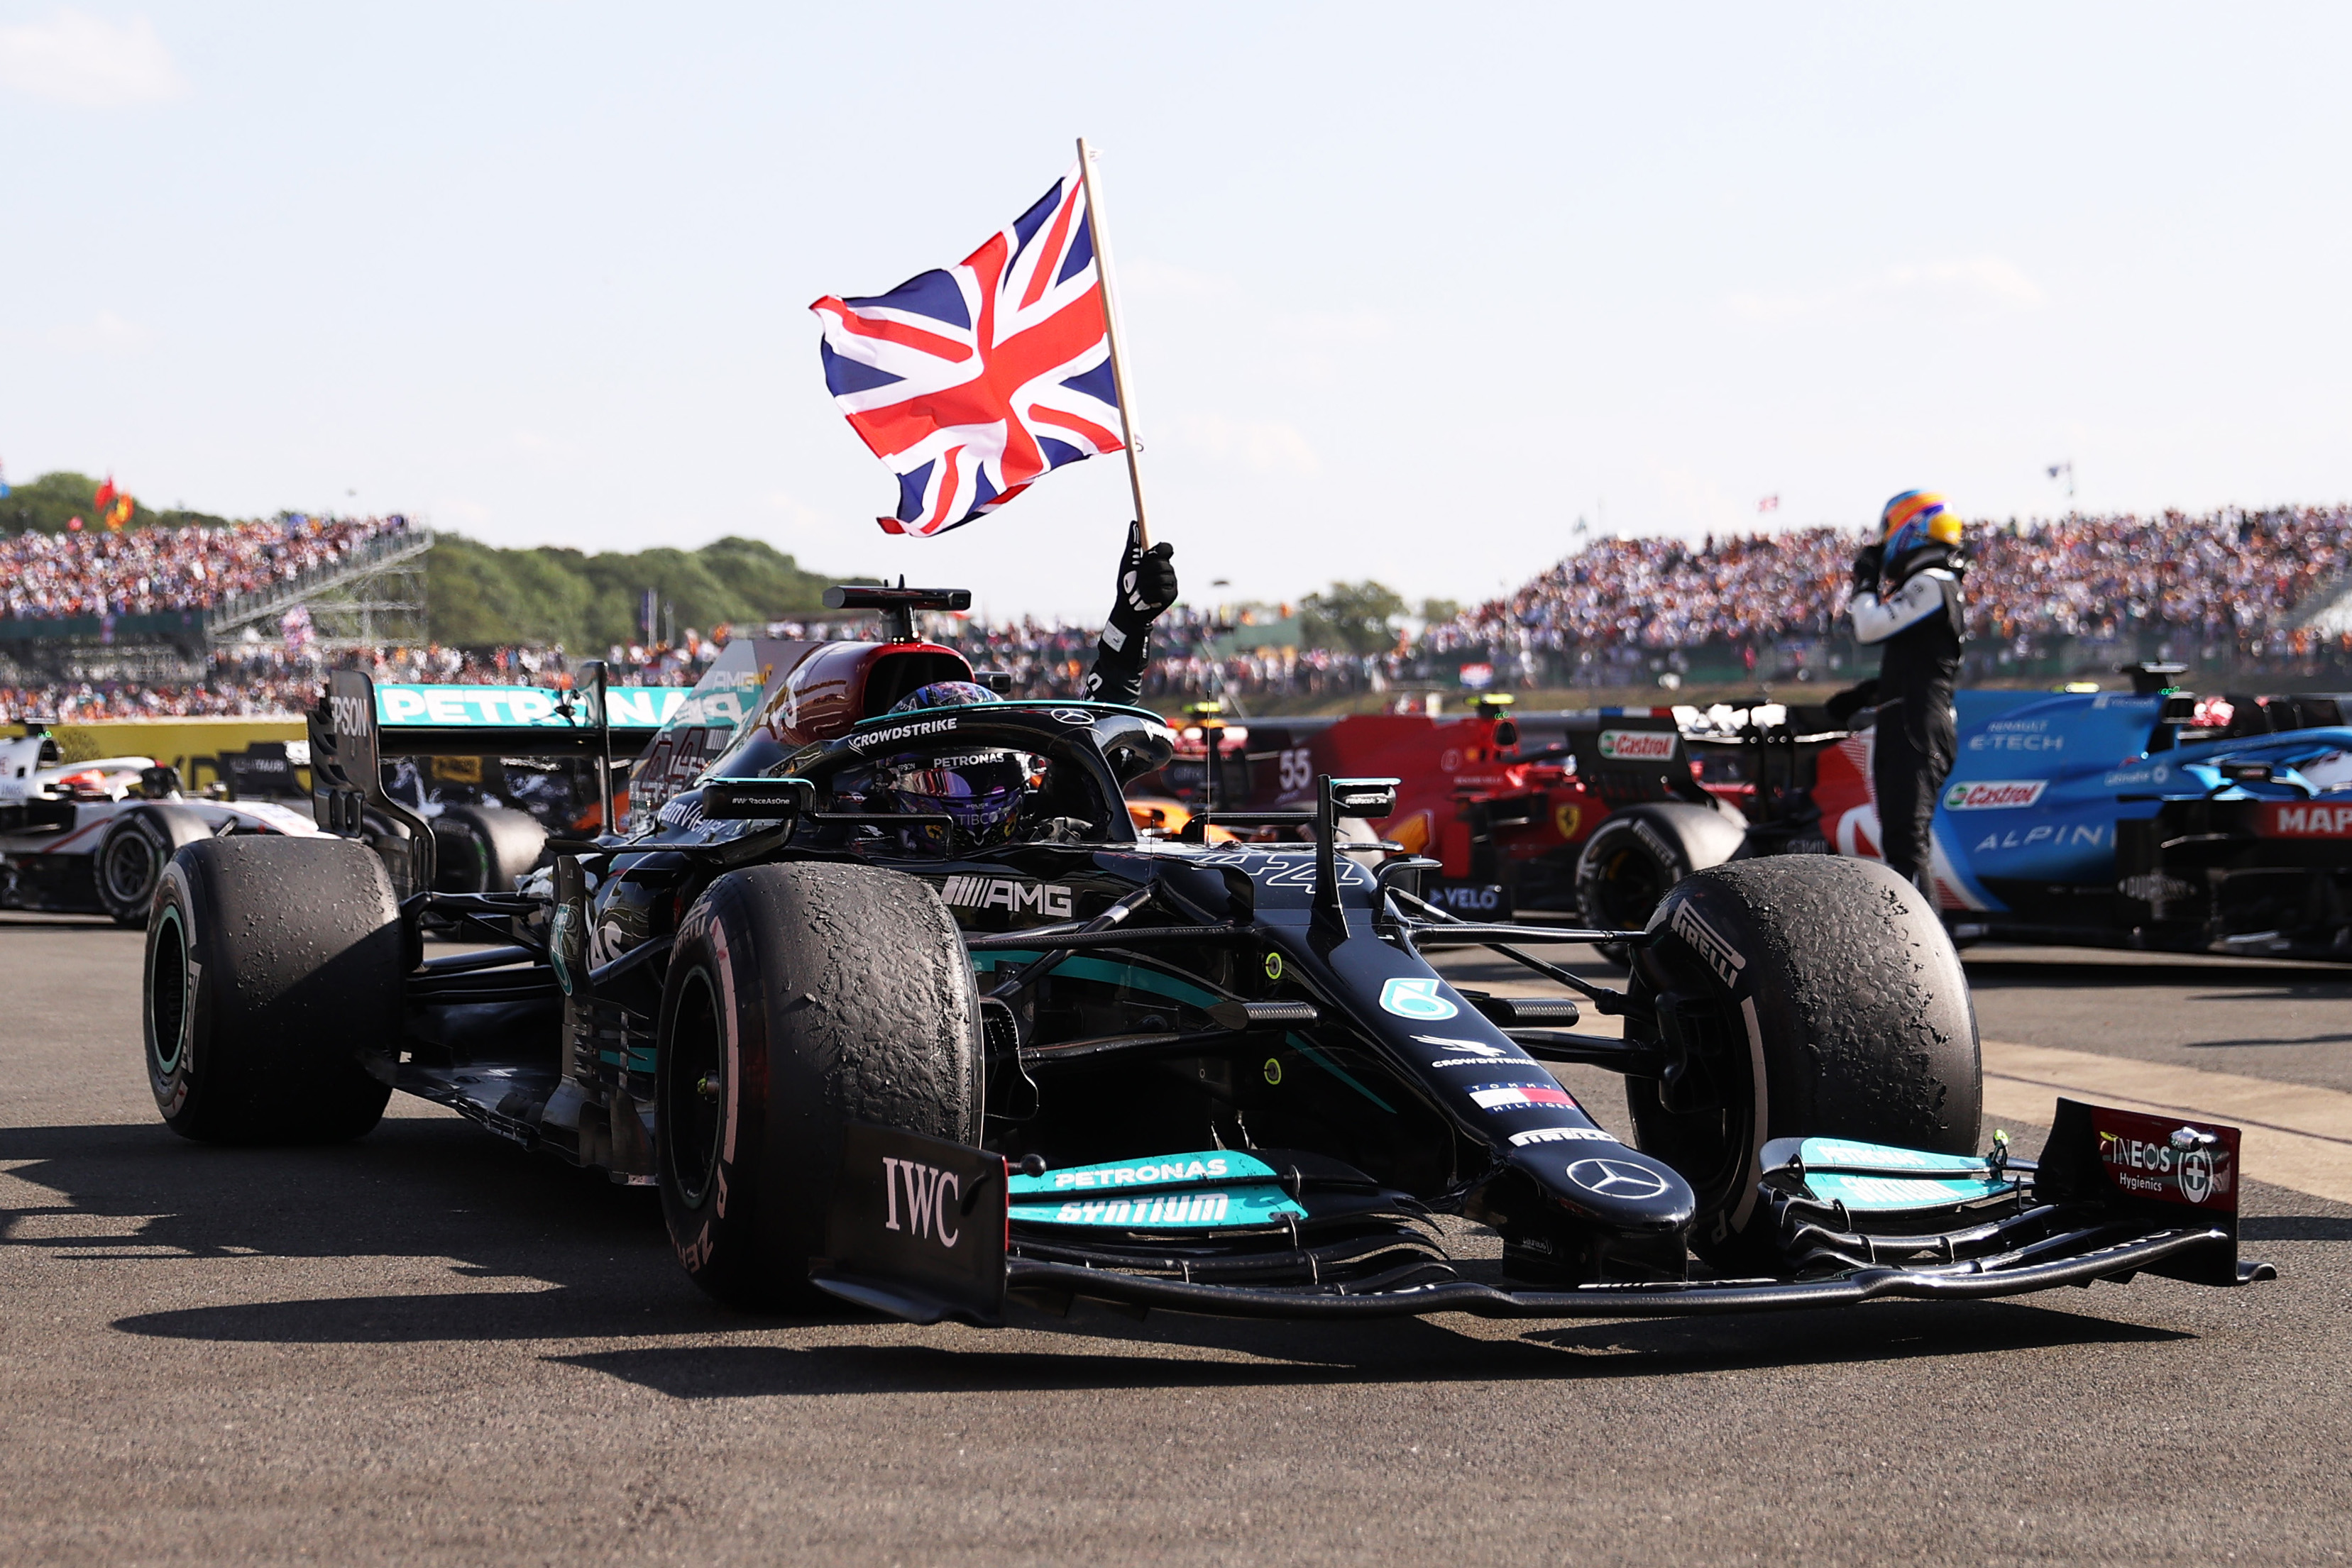 Silverstone Formula 1 2022 Dates, race schedule and circuit